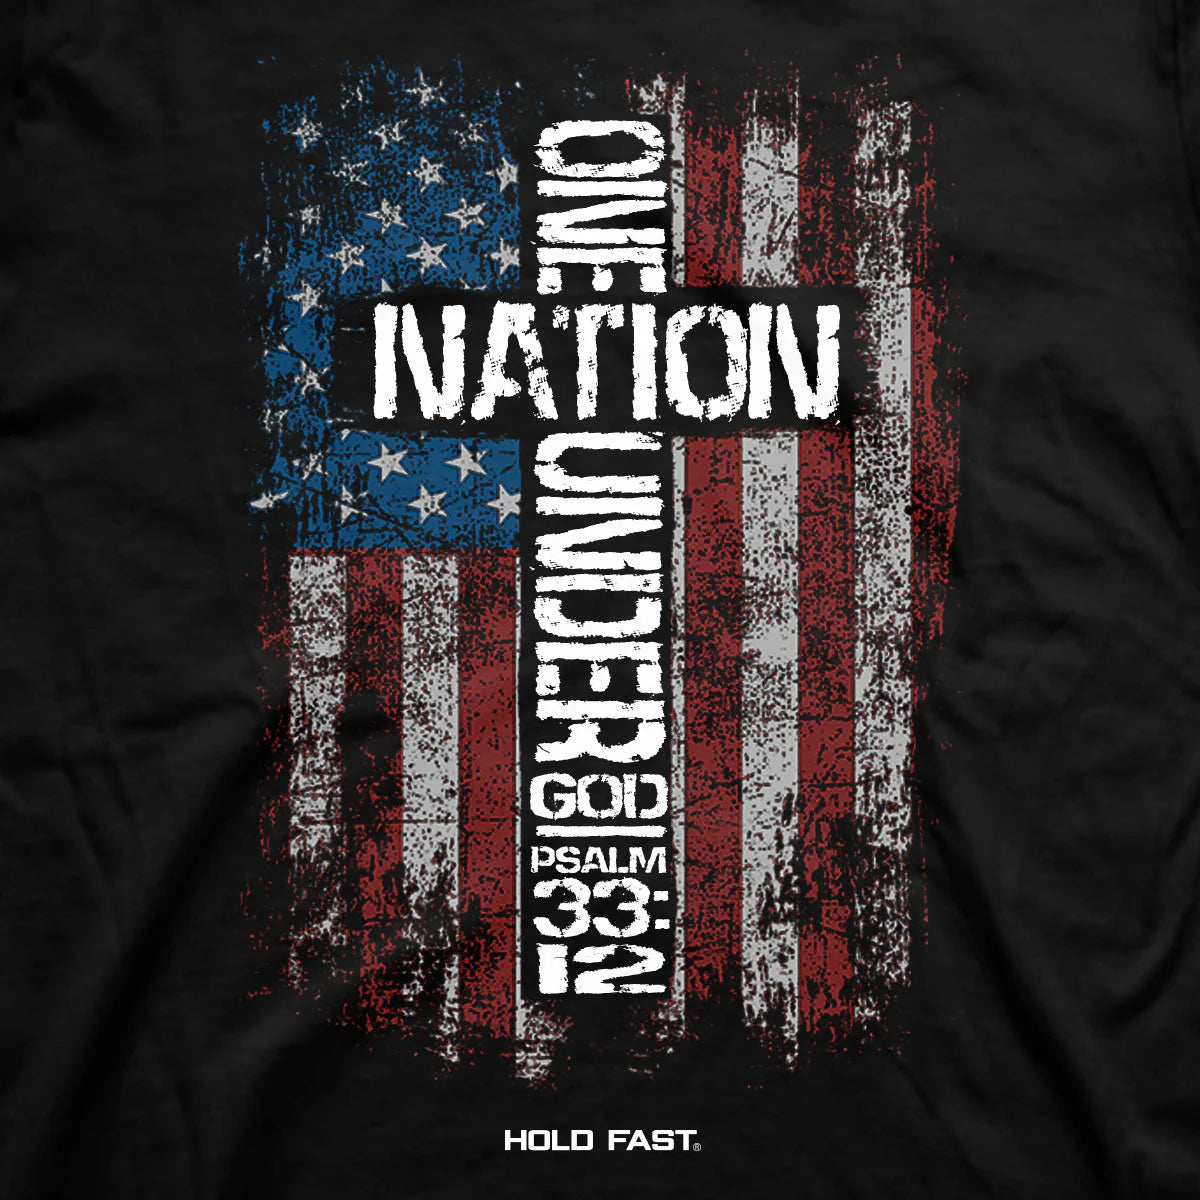 HOLD FAST Mens T-Shirt One Nation Flag HOLD FAST® Apparel Mens Short Sleeve T-shirts